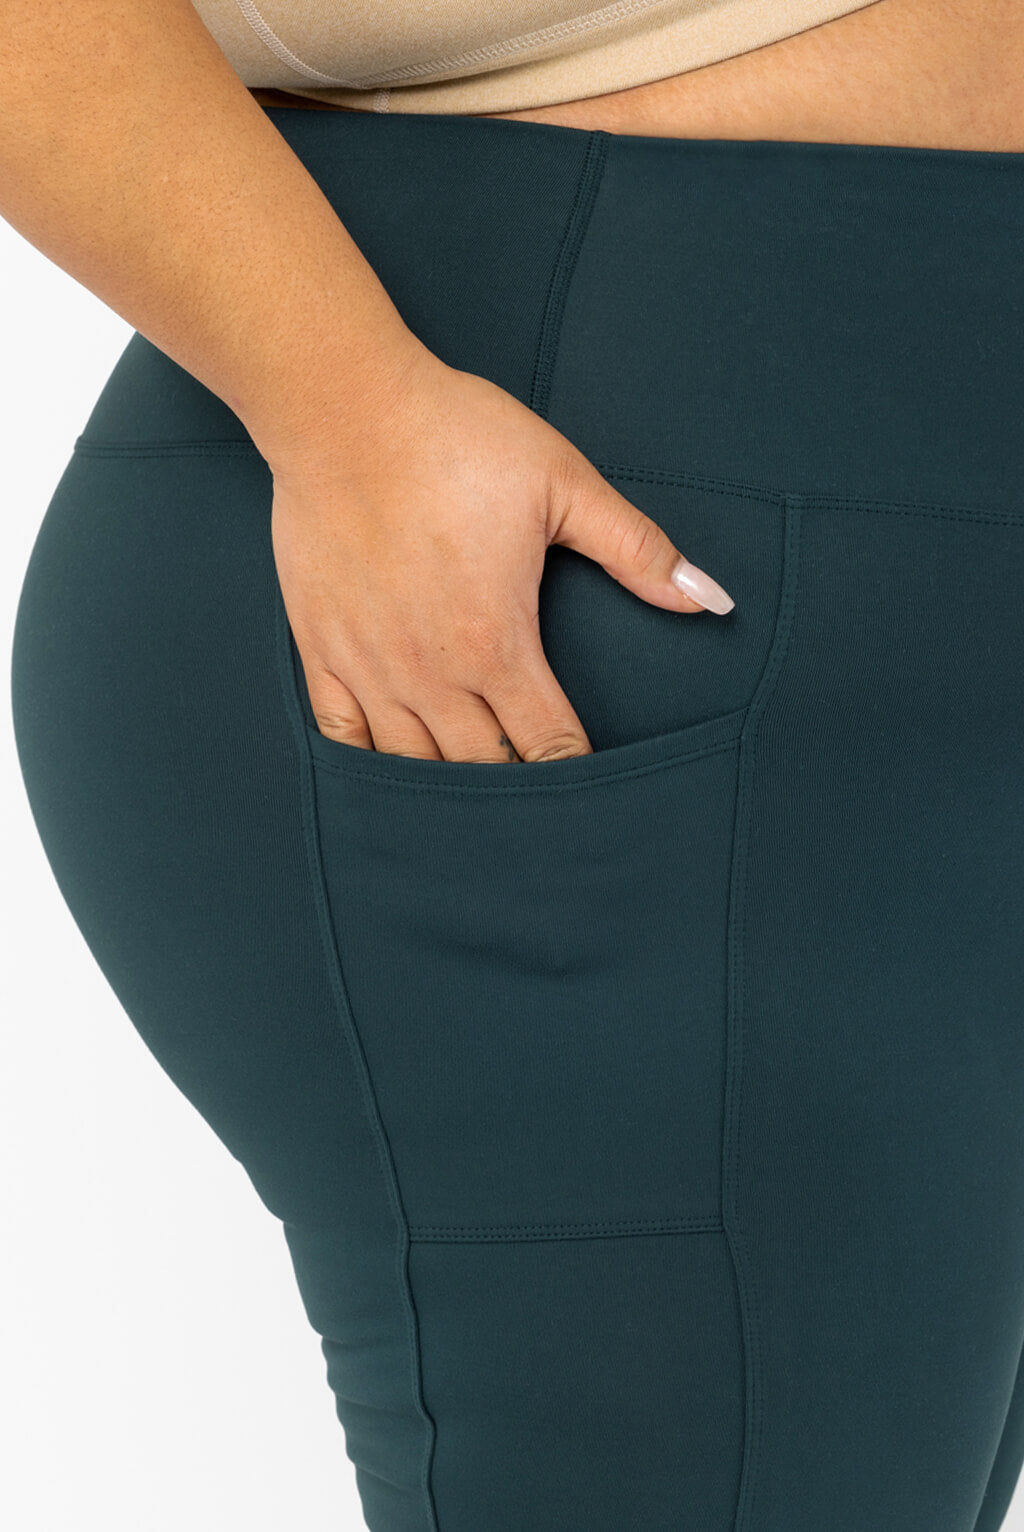 These plus size New Mix Brand peach skin capris are seamless, chic, and a  must-have for every wardrobe. These lightweight, capri leggings have a 3  waistband. They are versatile, perfect for layering